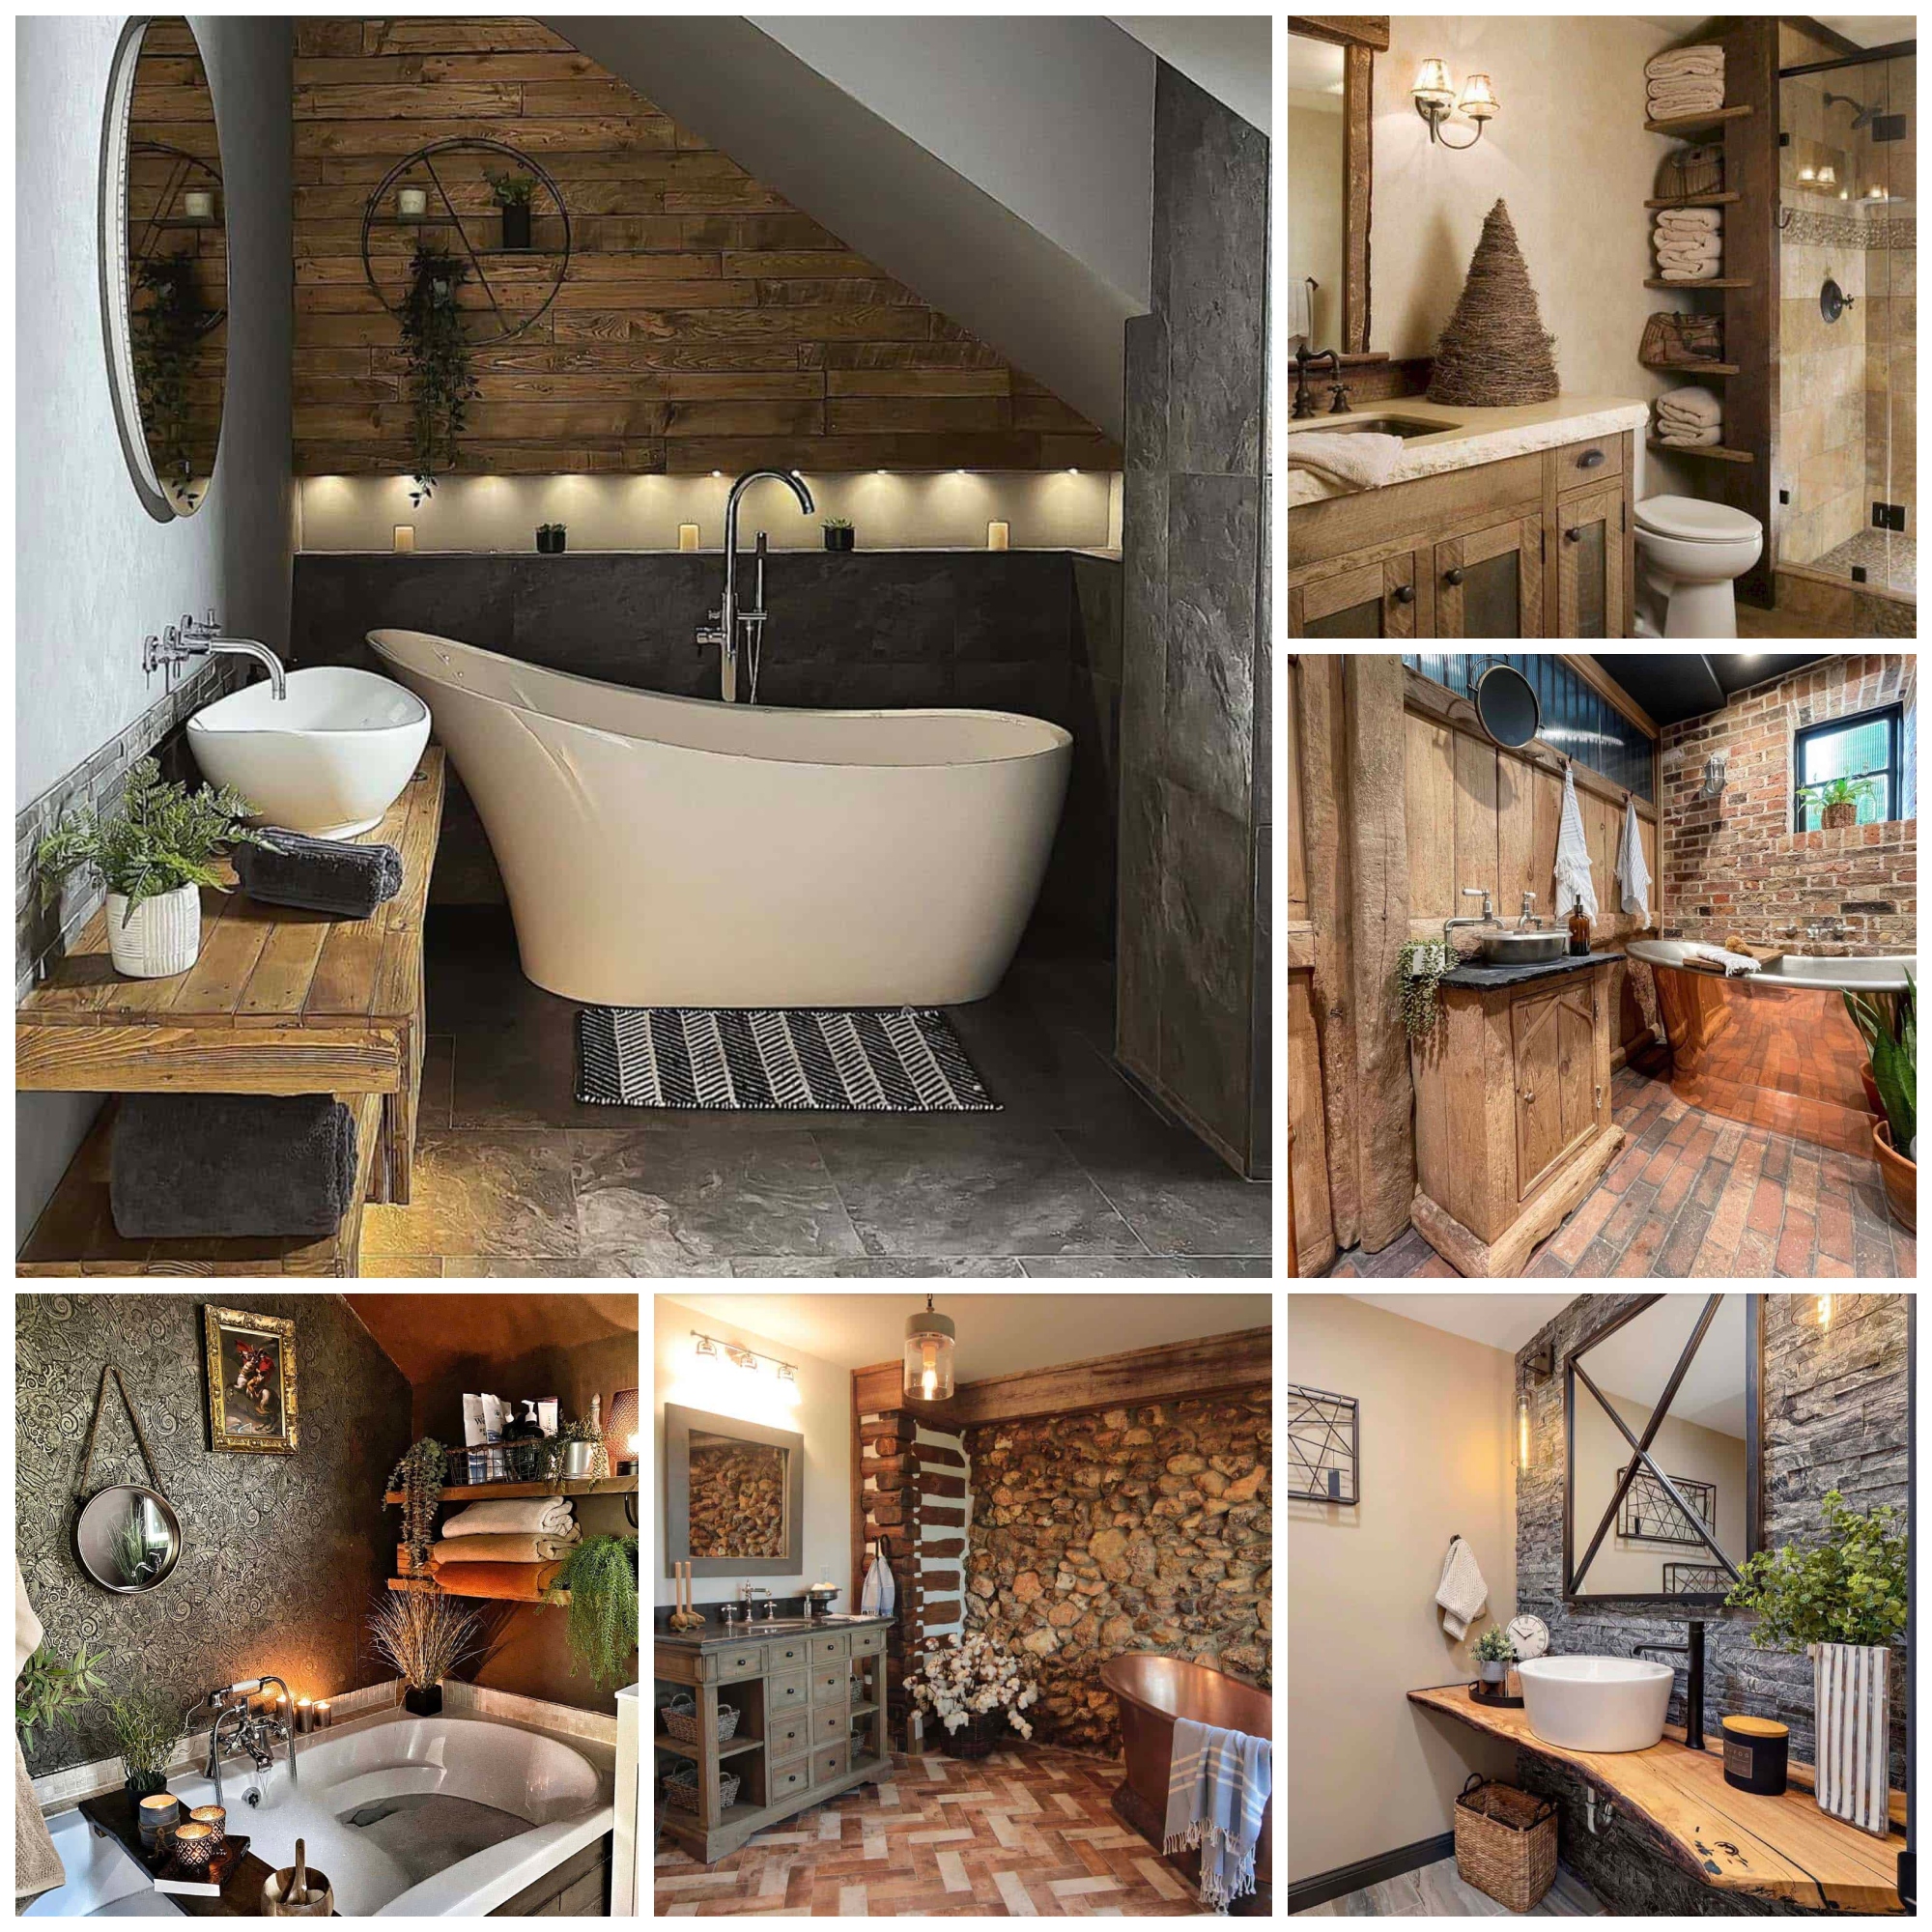 Rustic Bathroom Decor Ideas Inspired By Nature’s Beauty